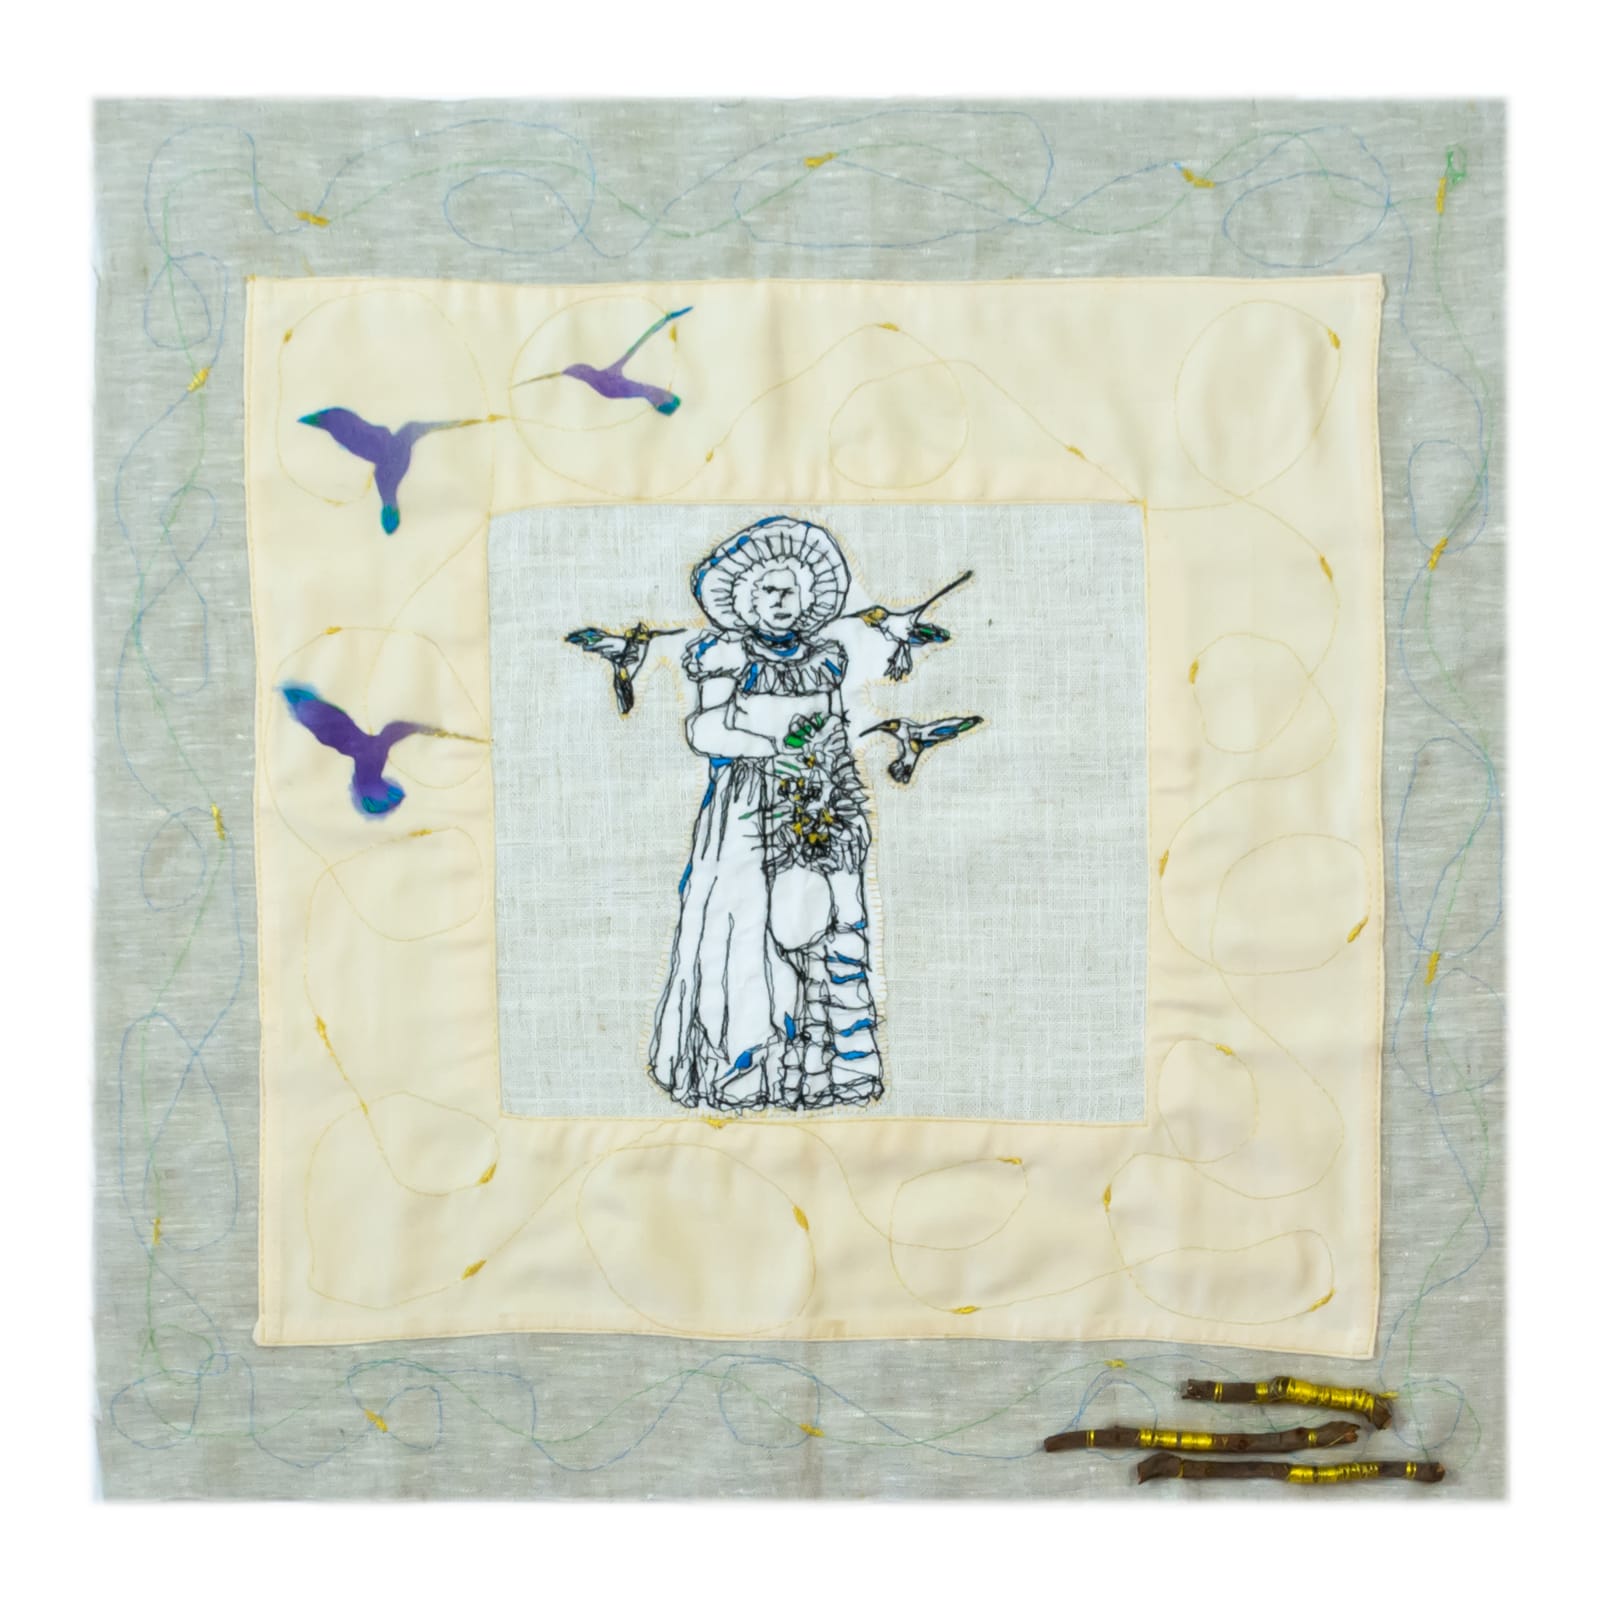 Linda Mangual Untitled, 2021 Fiber, applique, stitching, airbrush, embroidery, embedded natural twigs on heirloom napkin